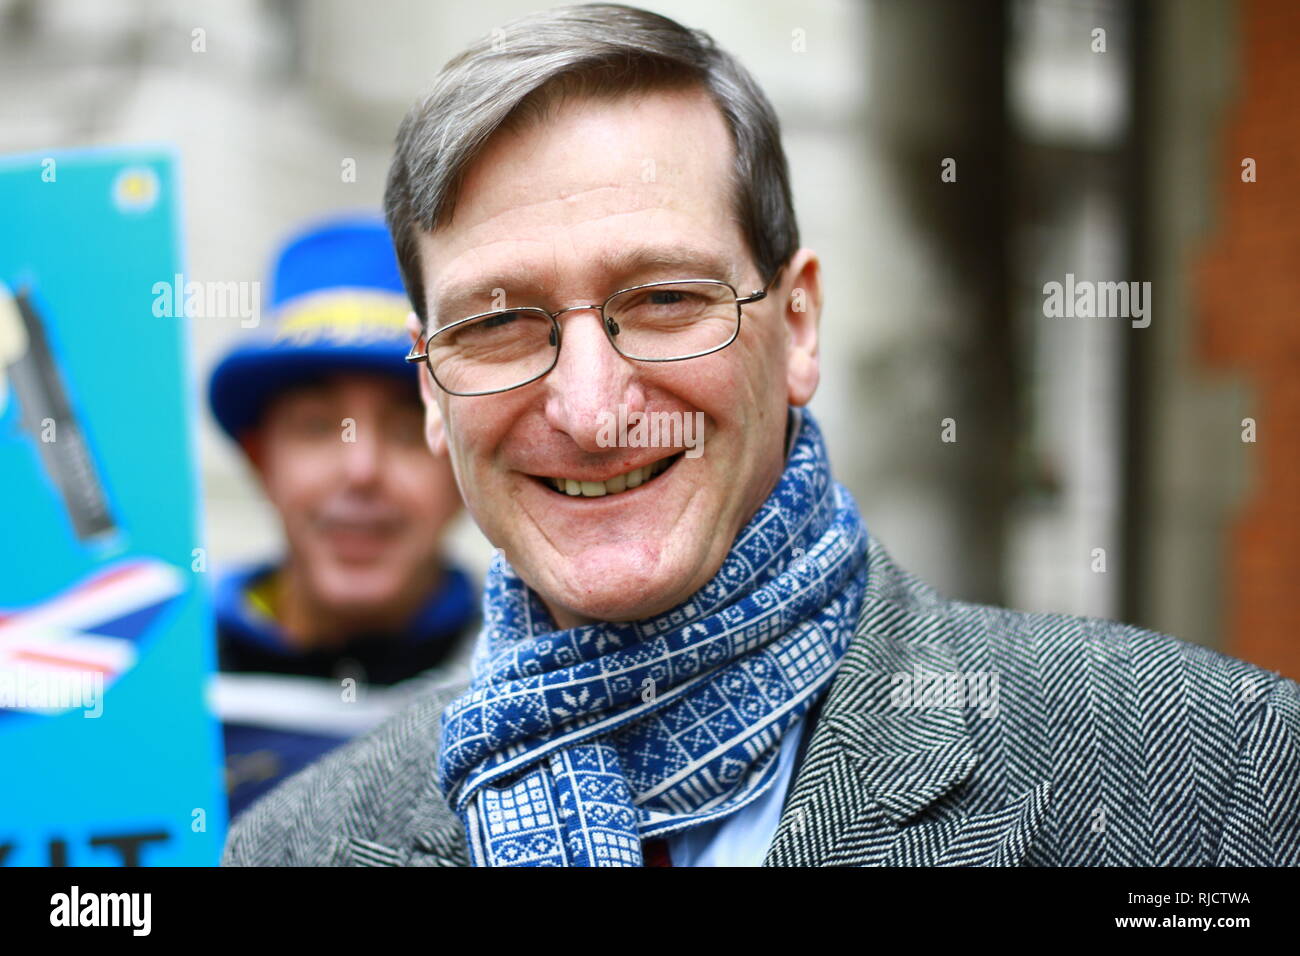 Dominic Grieve MP in Westminster, London, UK. on 5th February 2019. Conservative party. Member of the Privy council. Barrister and Queens council. [ QC ]  Pro Europe. British politicians. UK Politics. MPS. Member of the parliament of the United Kingdom. Stock Photo